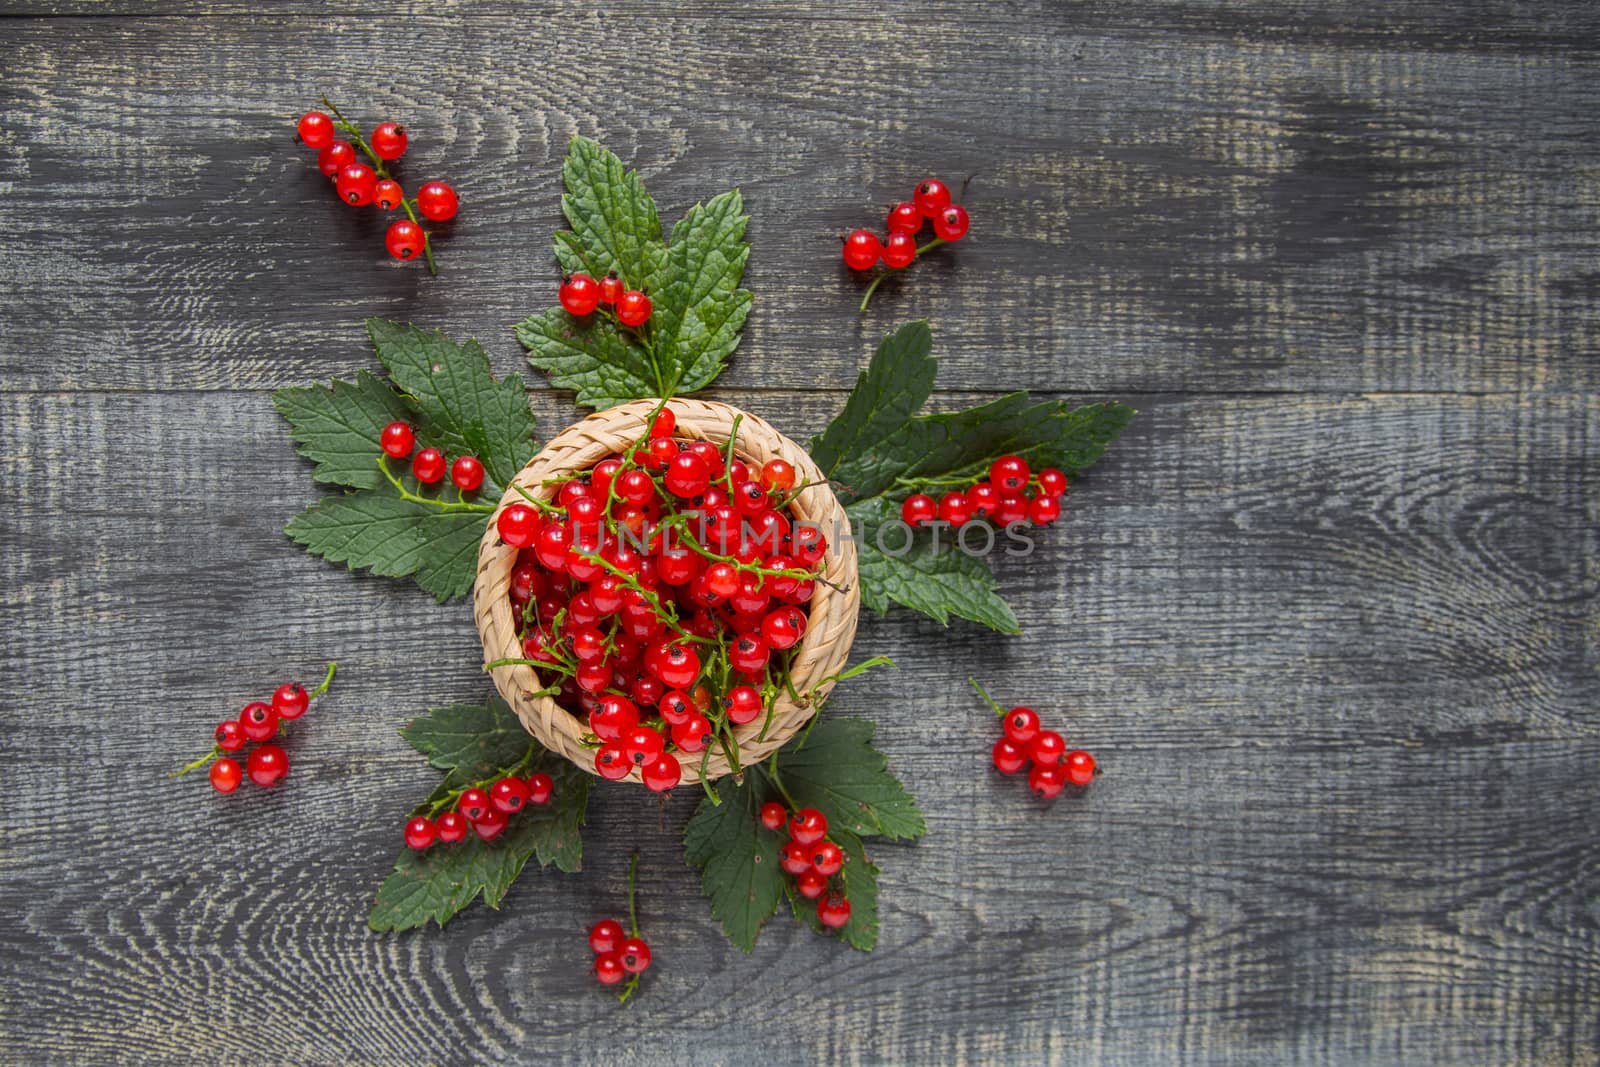 red currant berries in a ceramic bowl on a rustic wooden background. by galinasharapova